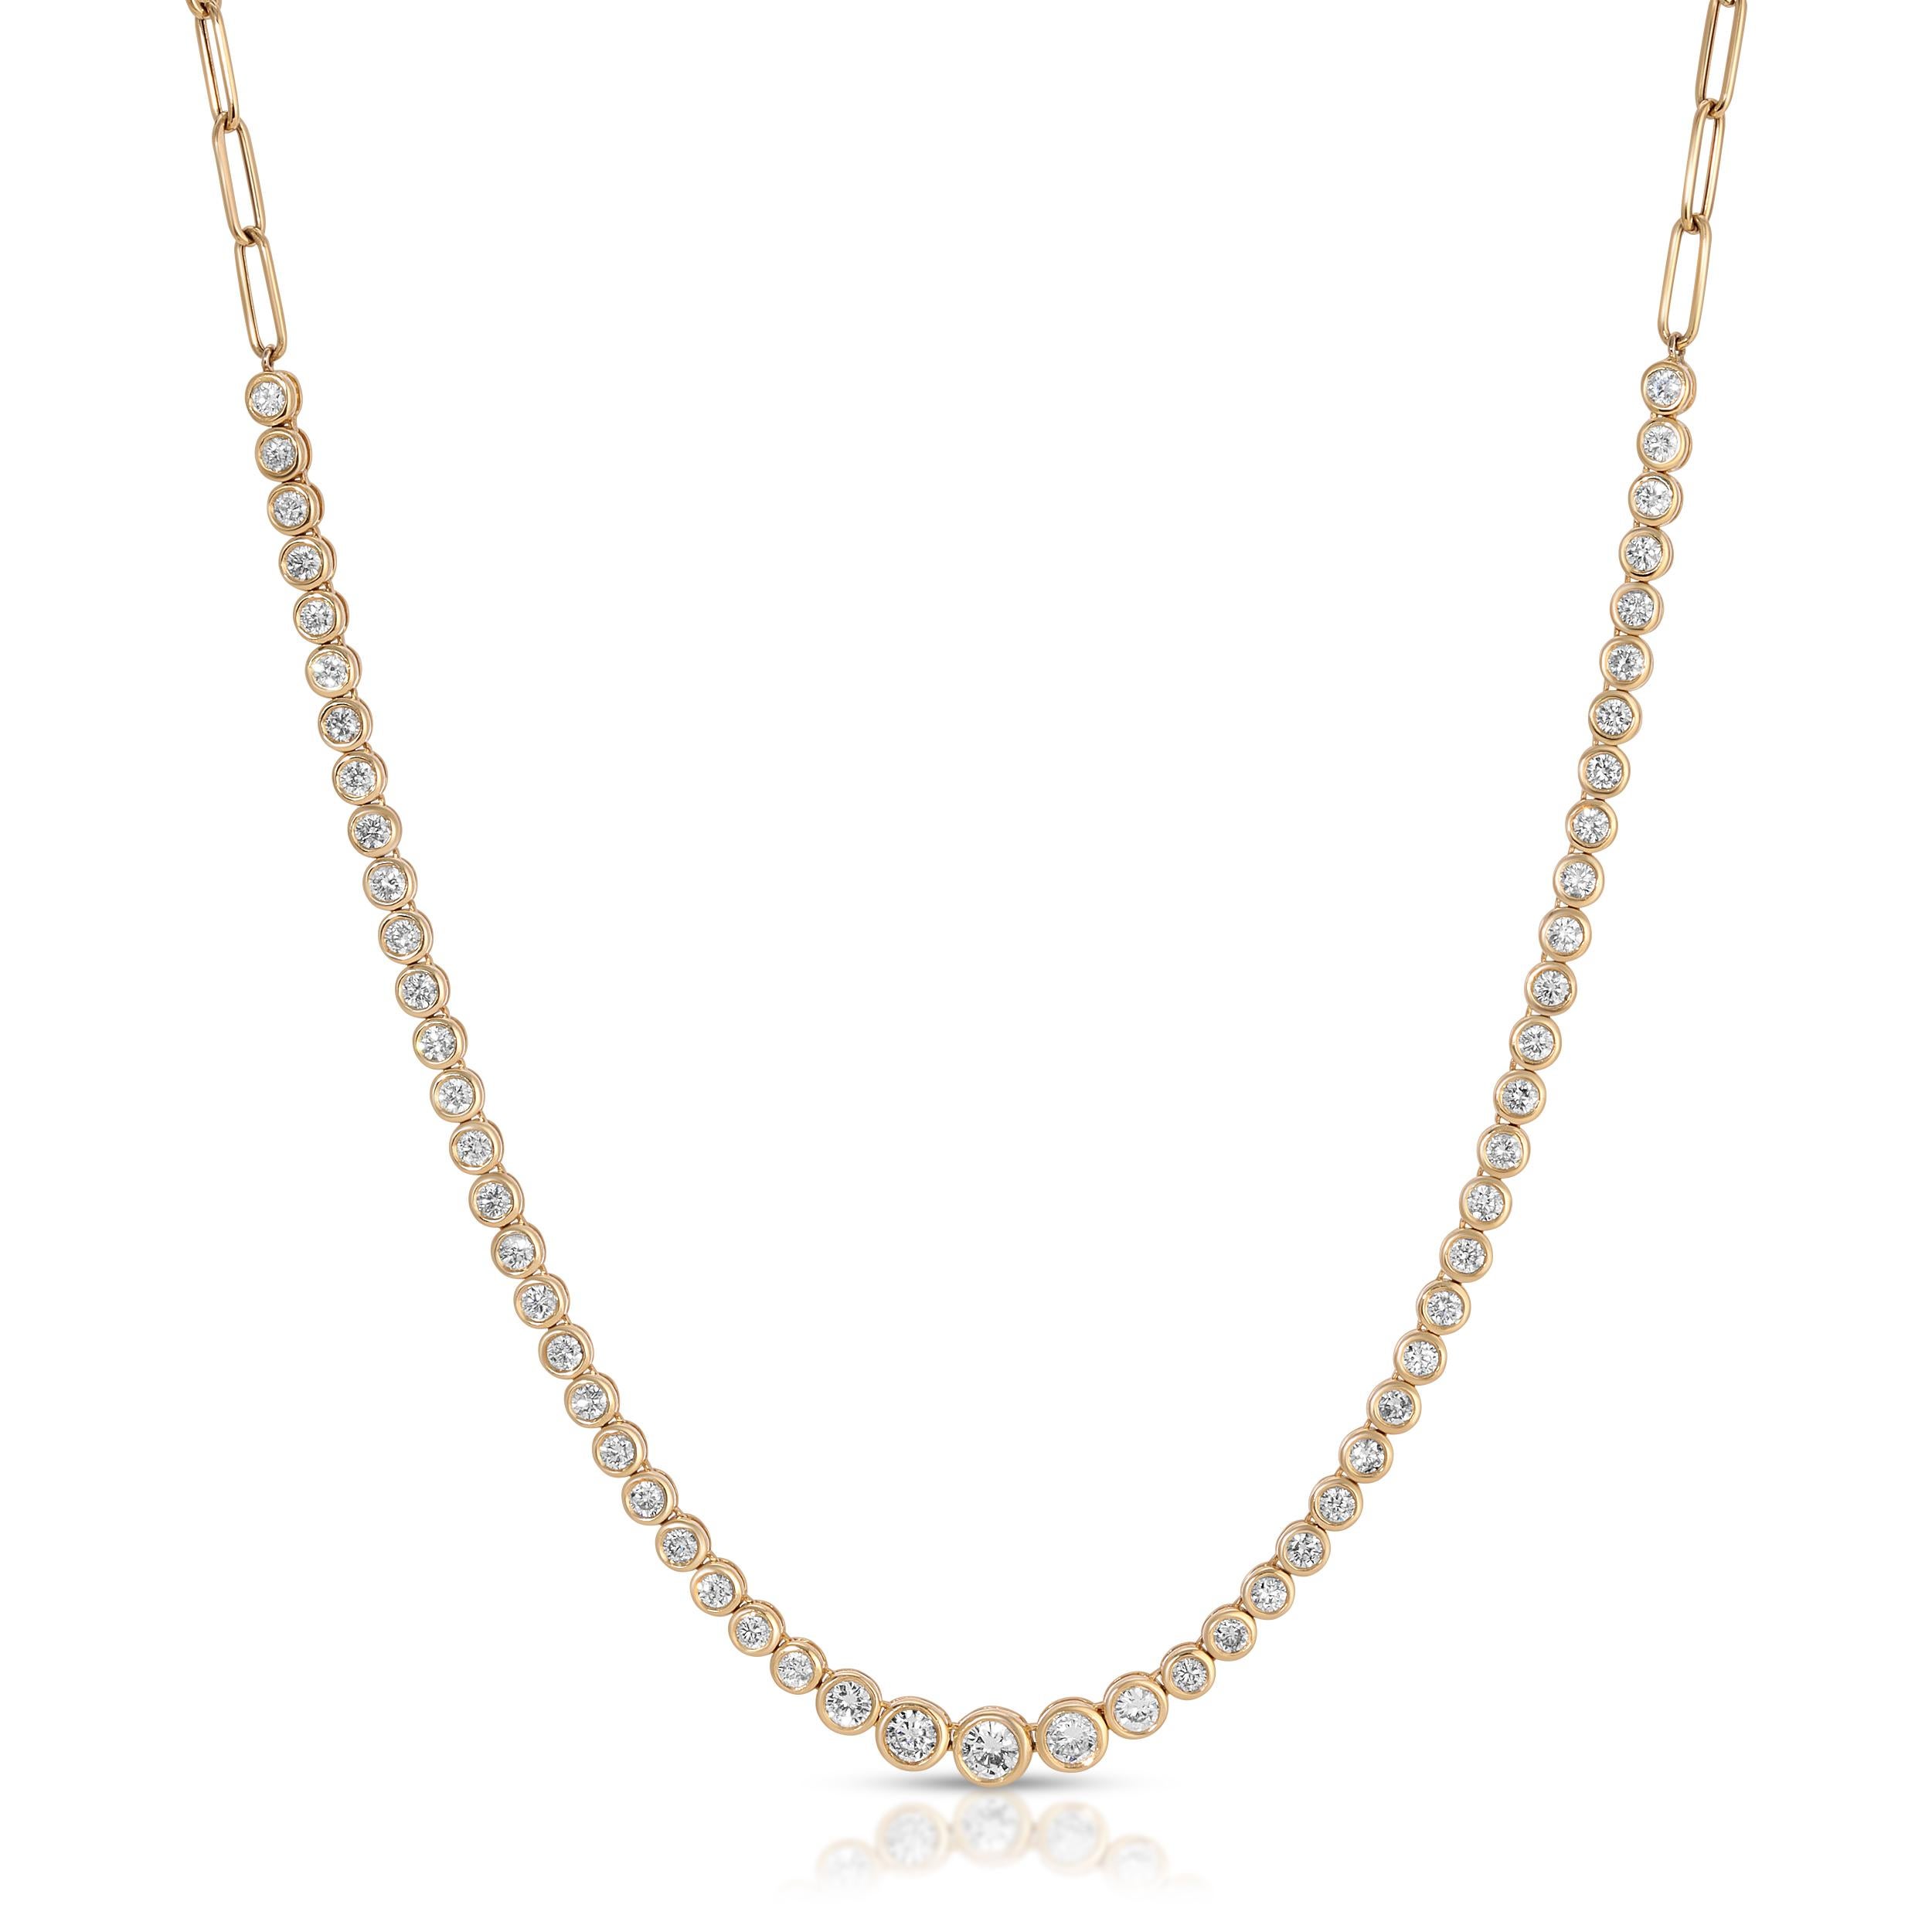 Necklace Information
Diamond Type : Natural Diamond
Metal : 14K
Metal Color : Yellow Gold
Total Carat Weight : 3.20ttcw
Metal Weight : 10.72g


Designed to grace your neckline with grace and sophistication, this choker is the epitome of timeless